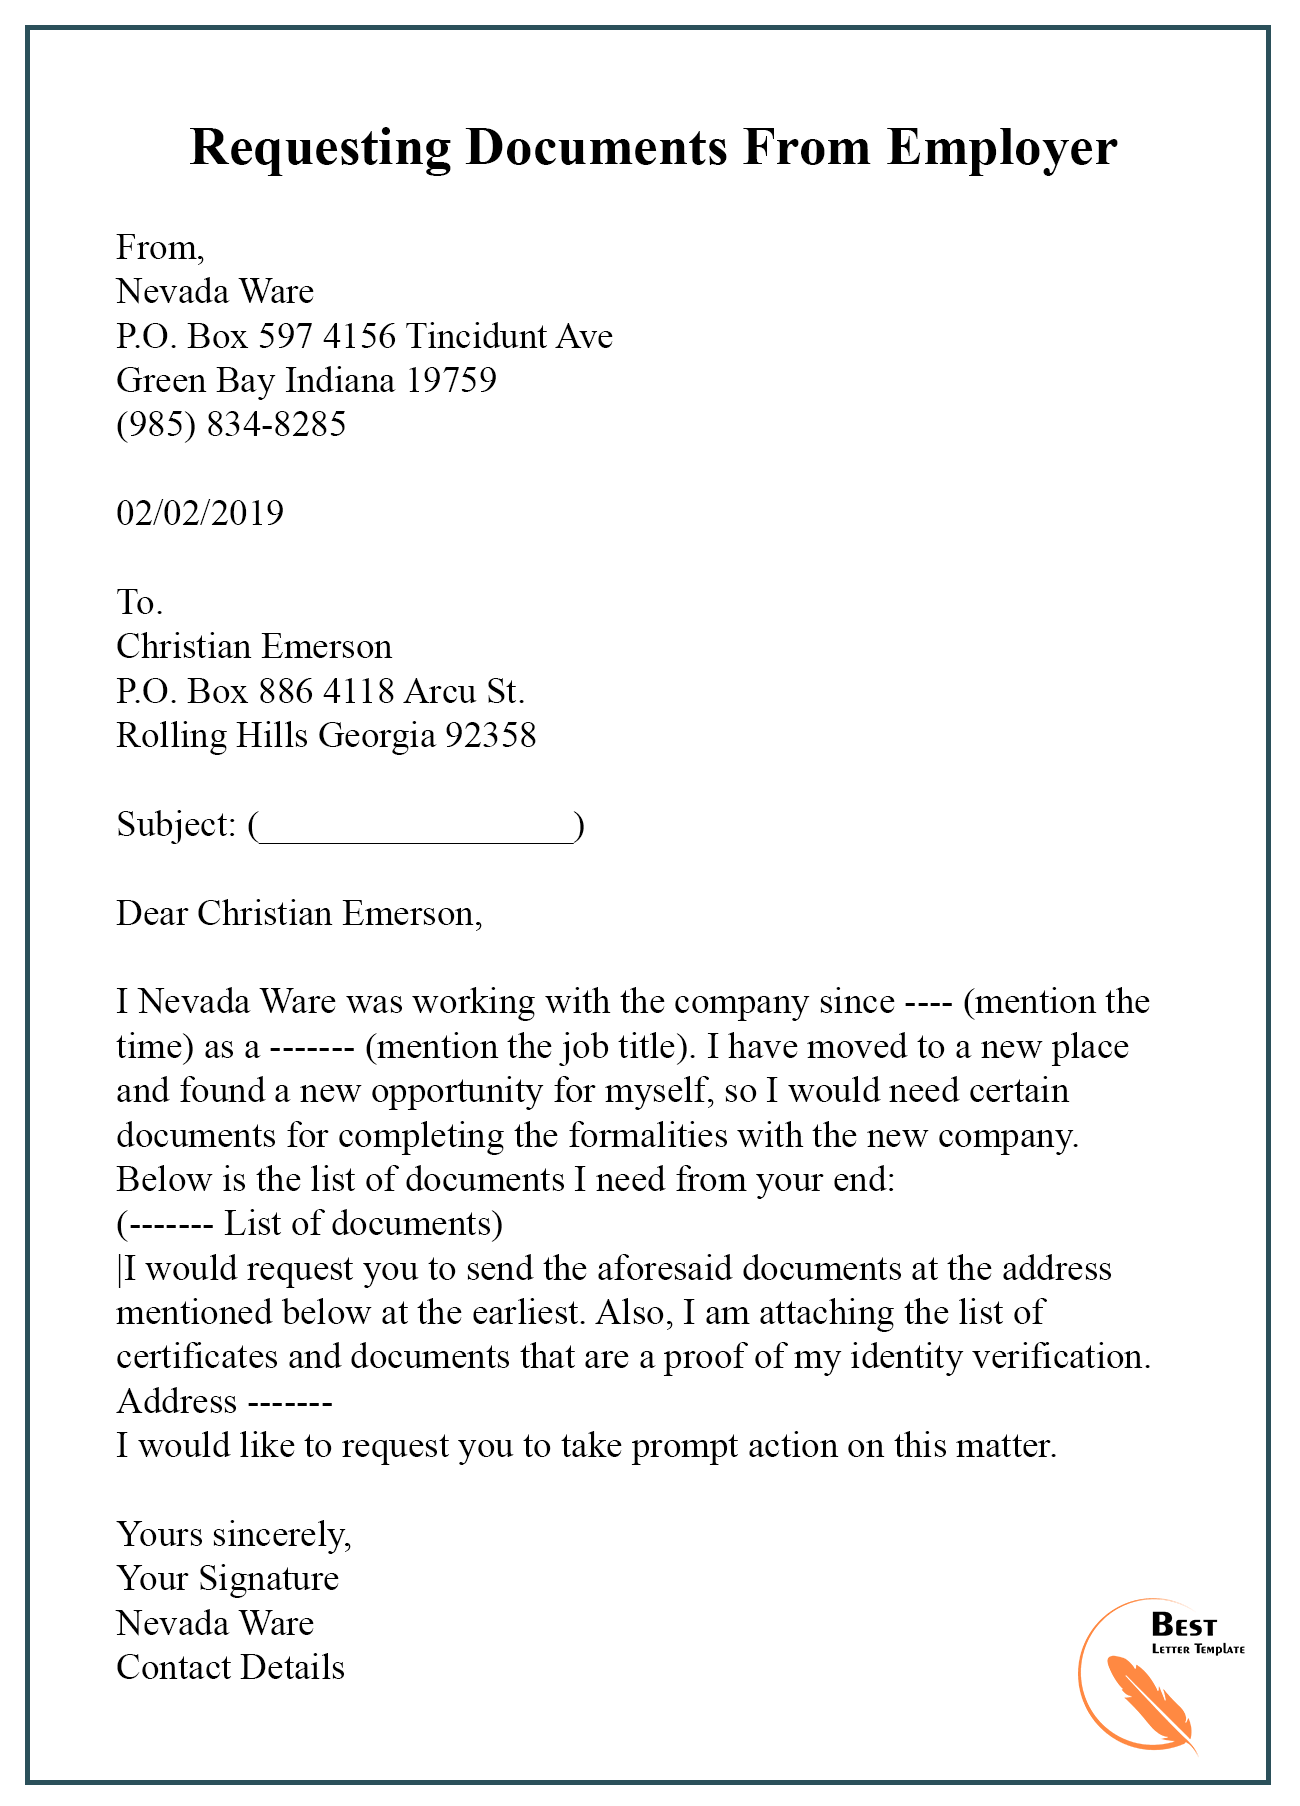 Sample Request Letter Template For Documents With Example